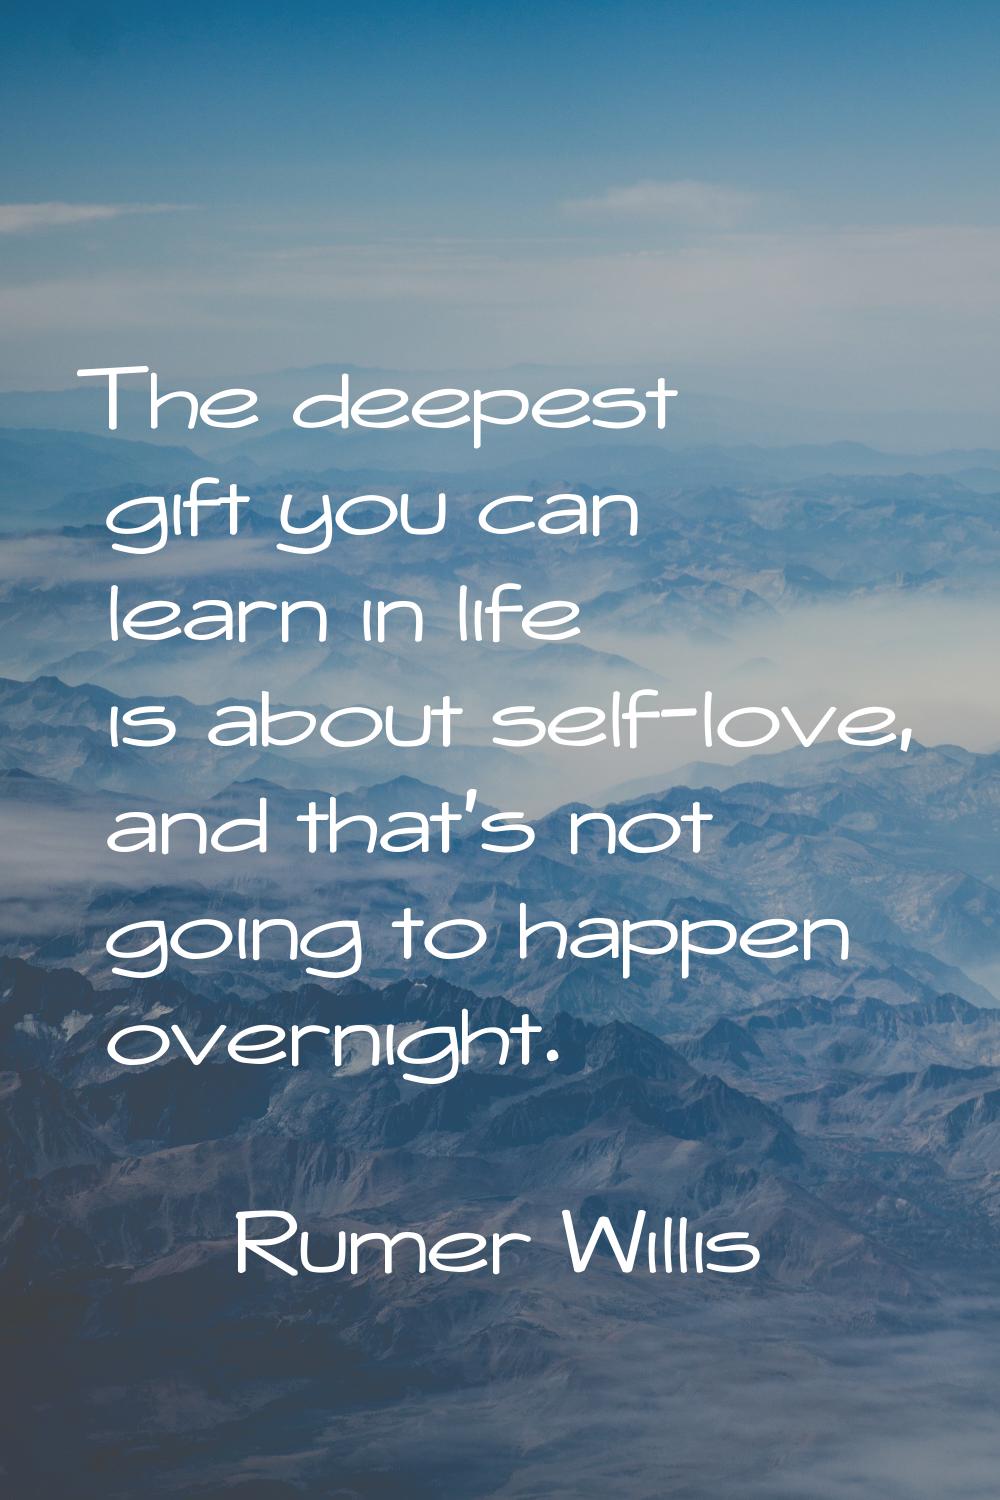 The deepest gift you can learn in life is about self-love, and that's not going to happen overnight